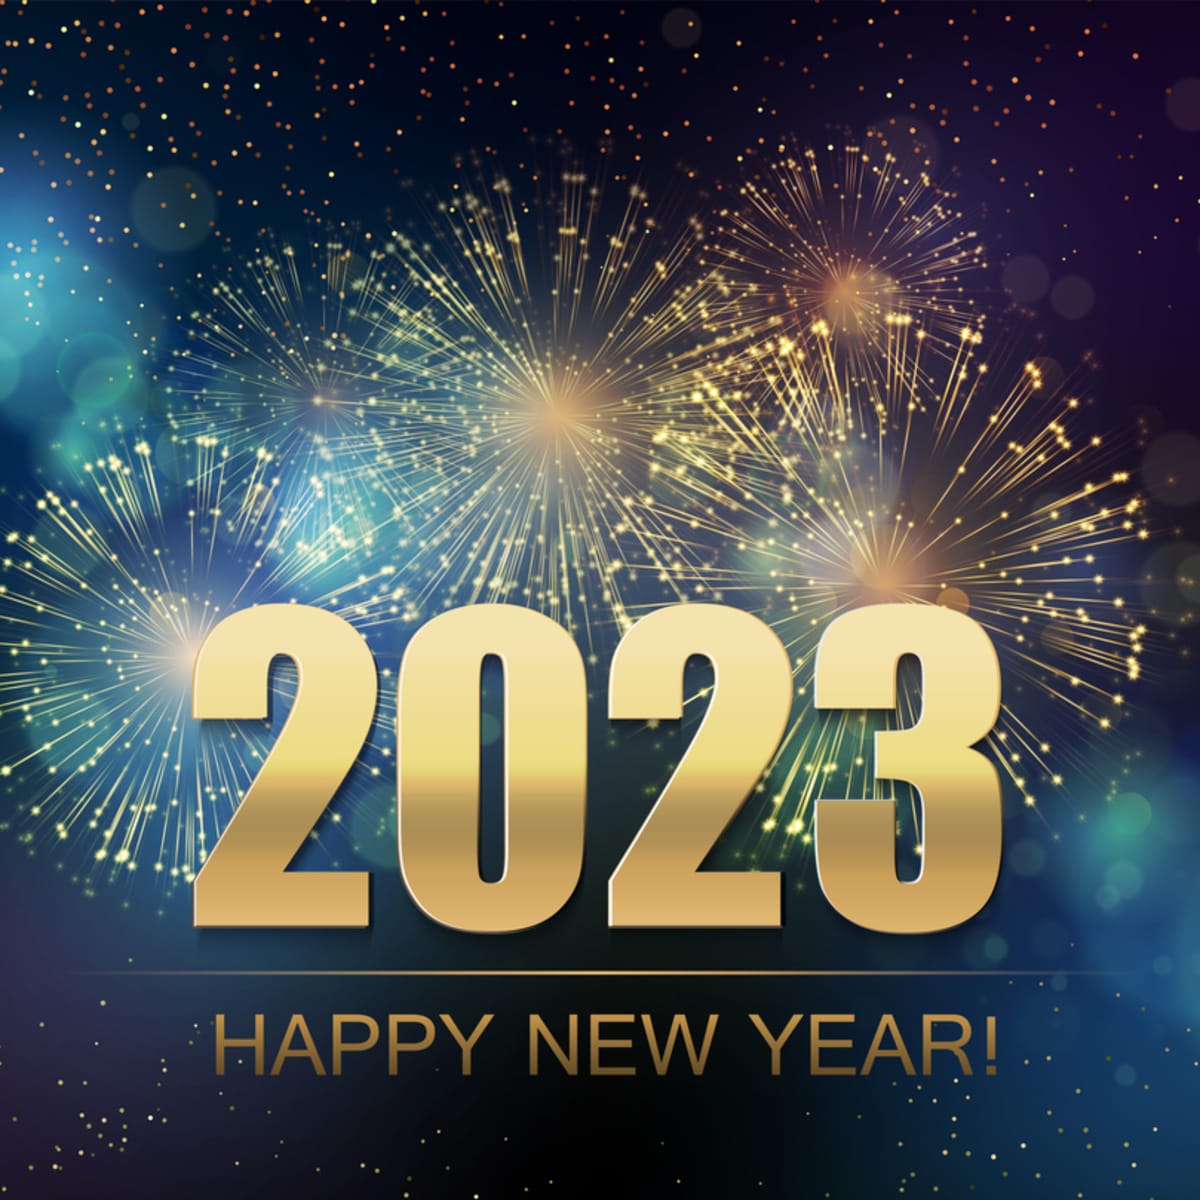 As we ring in the New Year.... Happy 2023 ANNOUNCEMENT